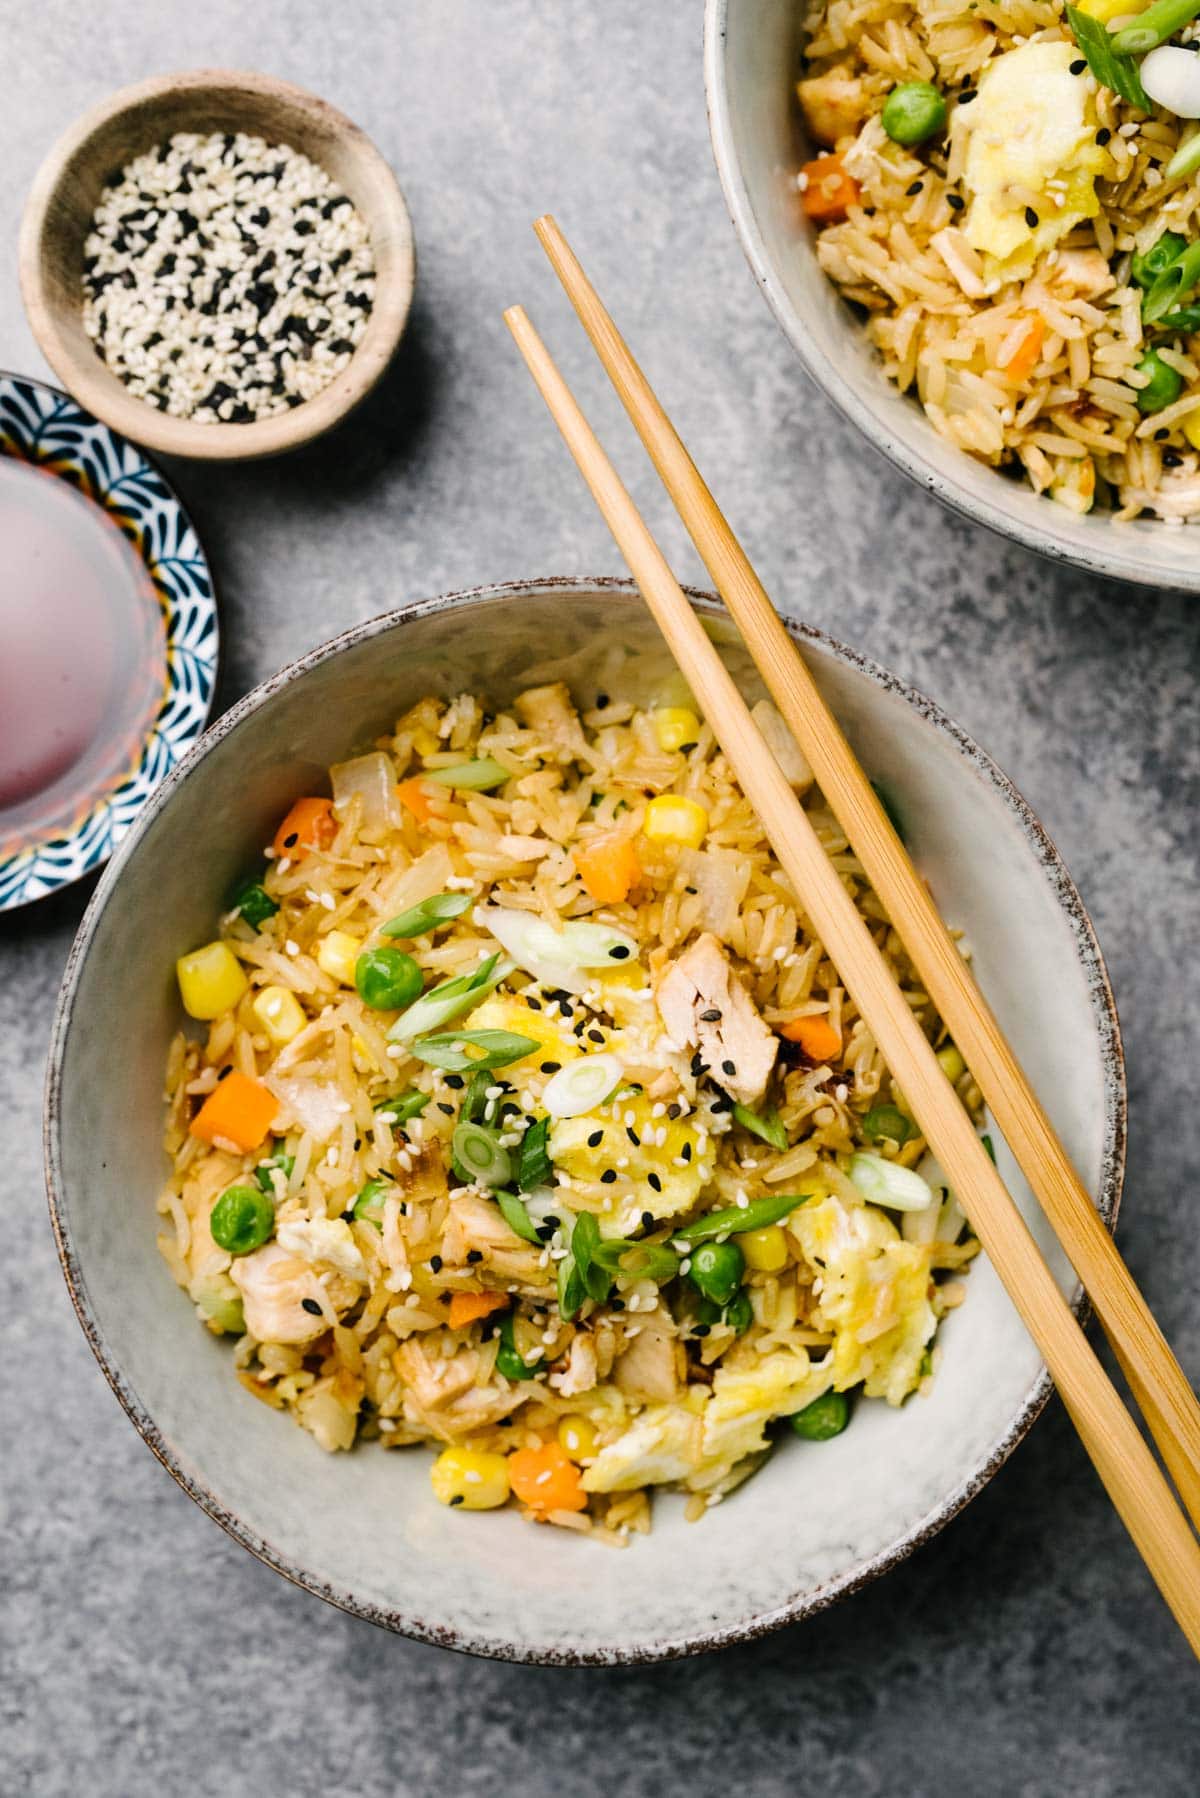 Two bowls of leftover turkey fried rice on a marble background, with small bowls of soy sauce and sesame seeds to the side.